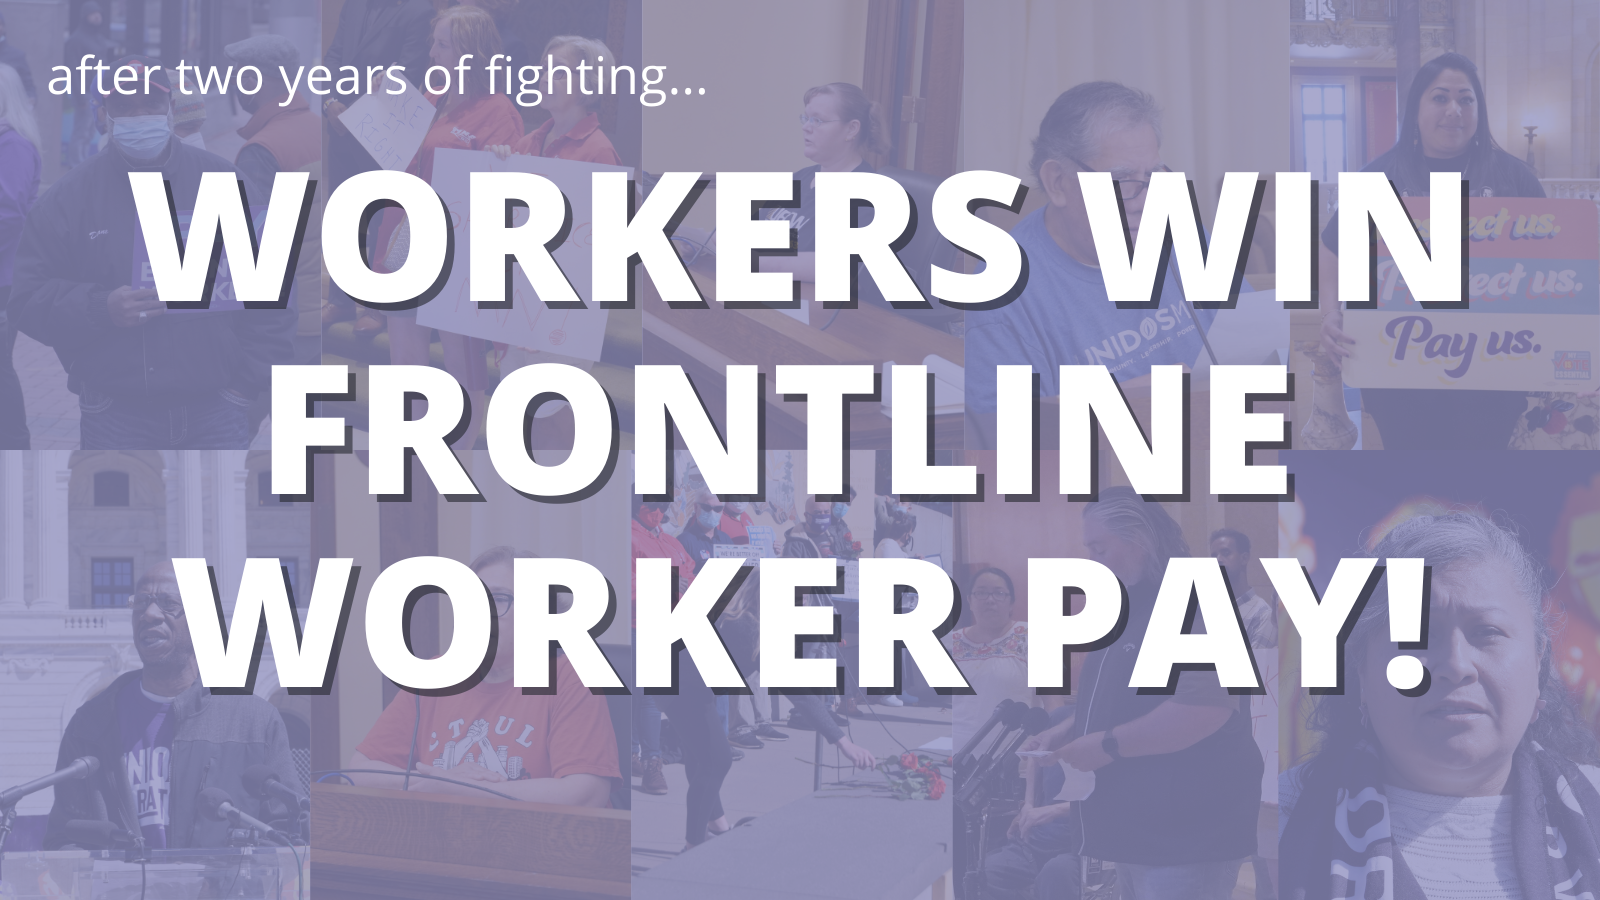 after two years of fighting WORKERS WIN FRONTLINE WORKER PAY!